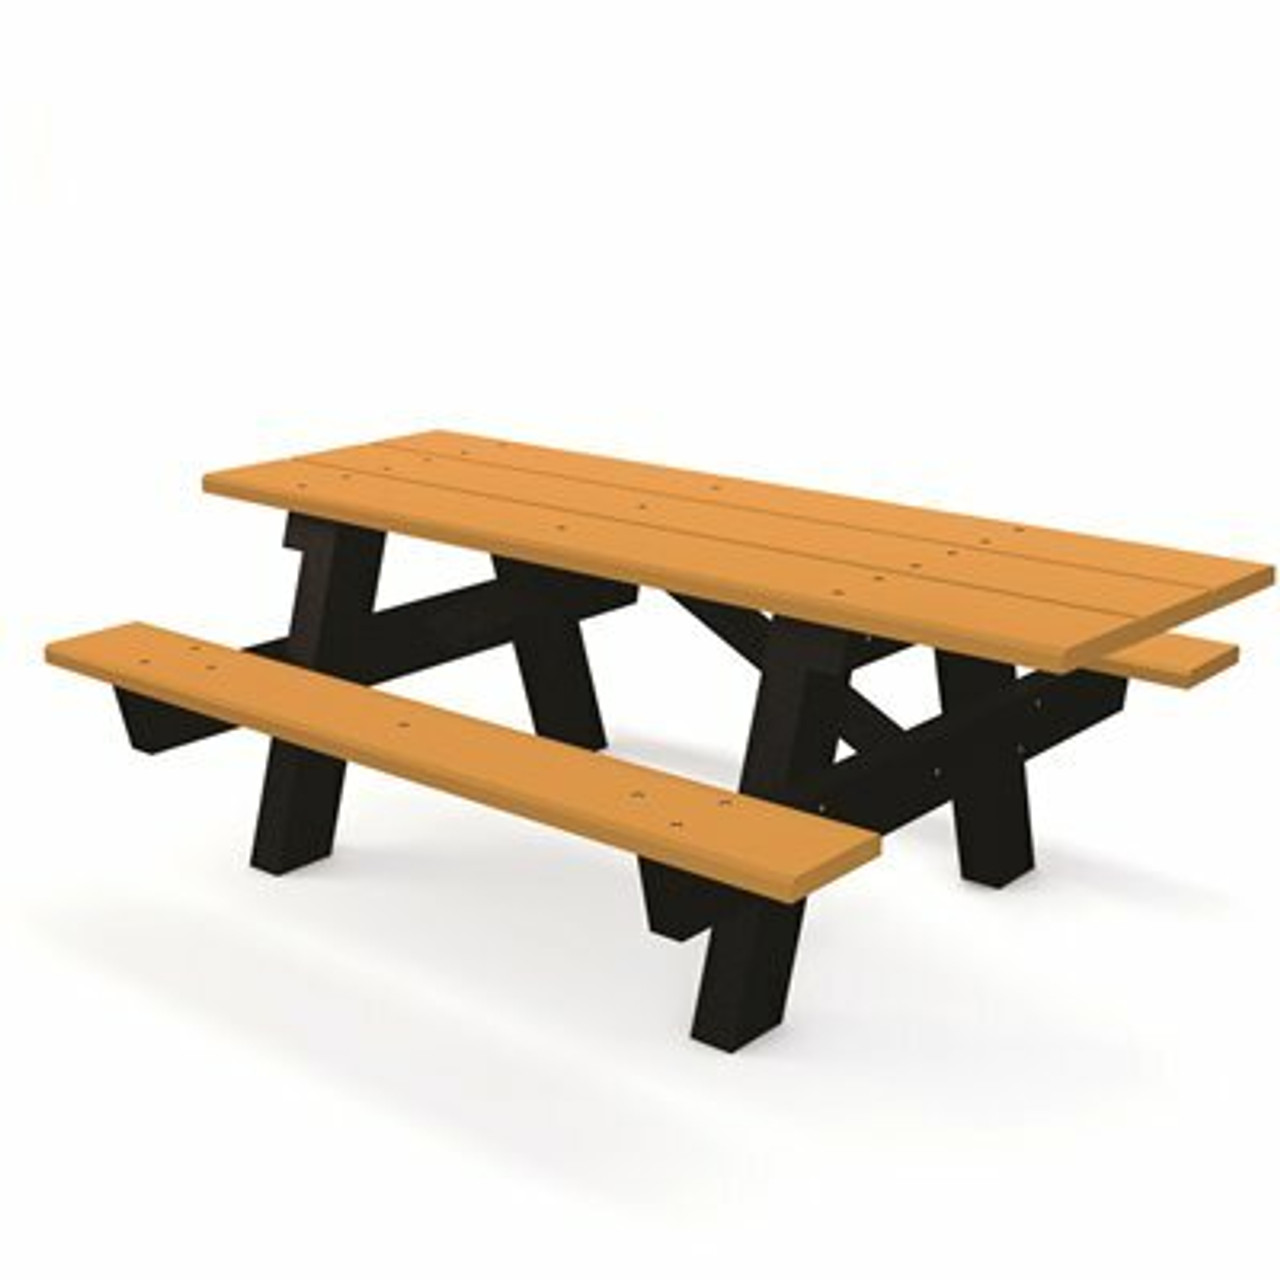 A-Frame 6 Ft. Cedar Ada Recycled Plastic Picnic Table